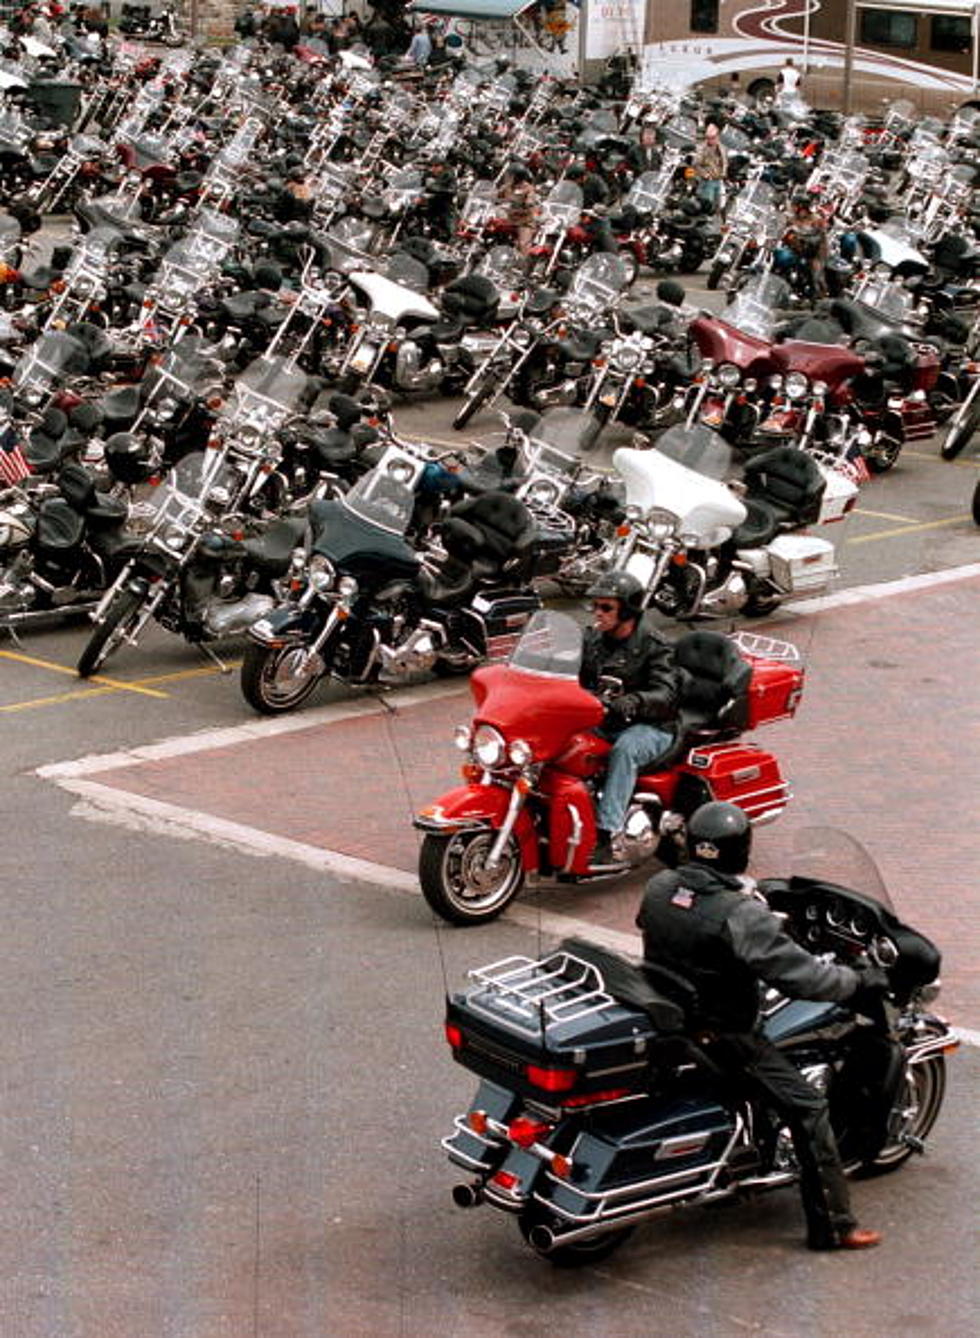 El Paso Area Bikers; The Run For The Wall Is Coming!!